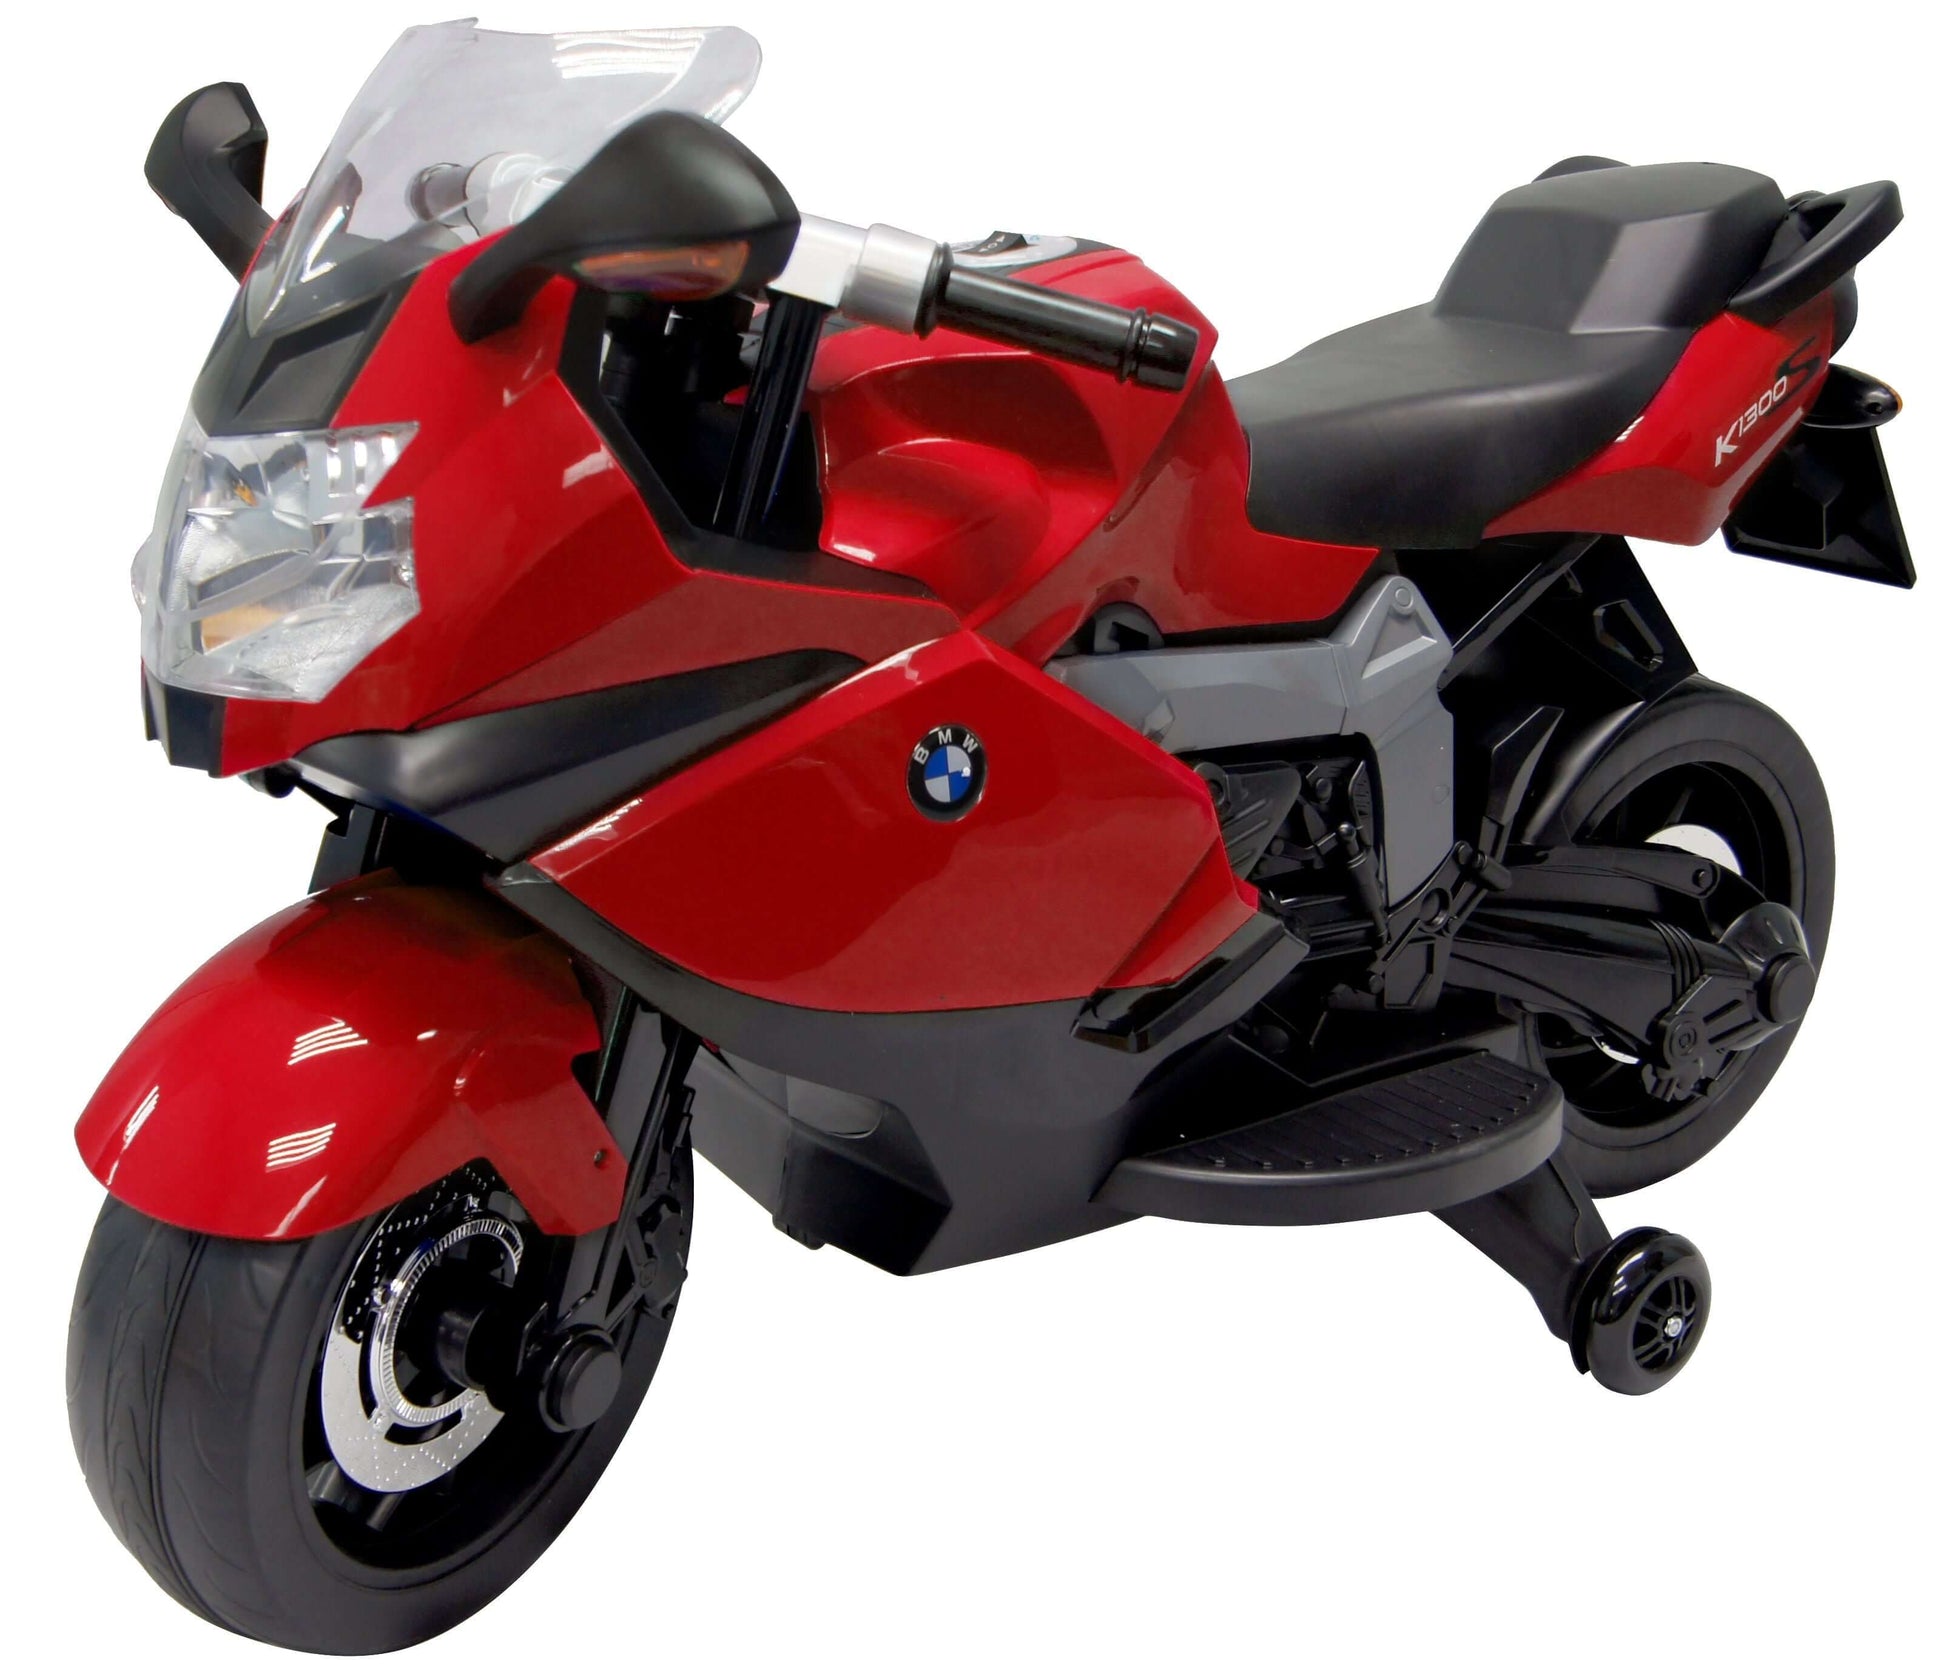 BMW Ride On Motorcycle 12V - Red